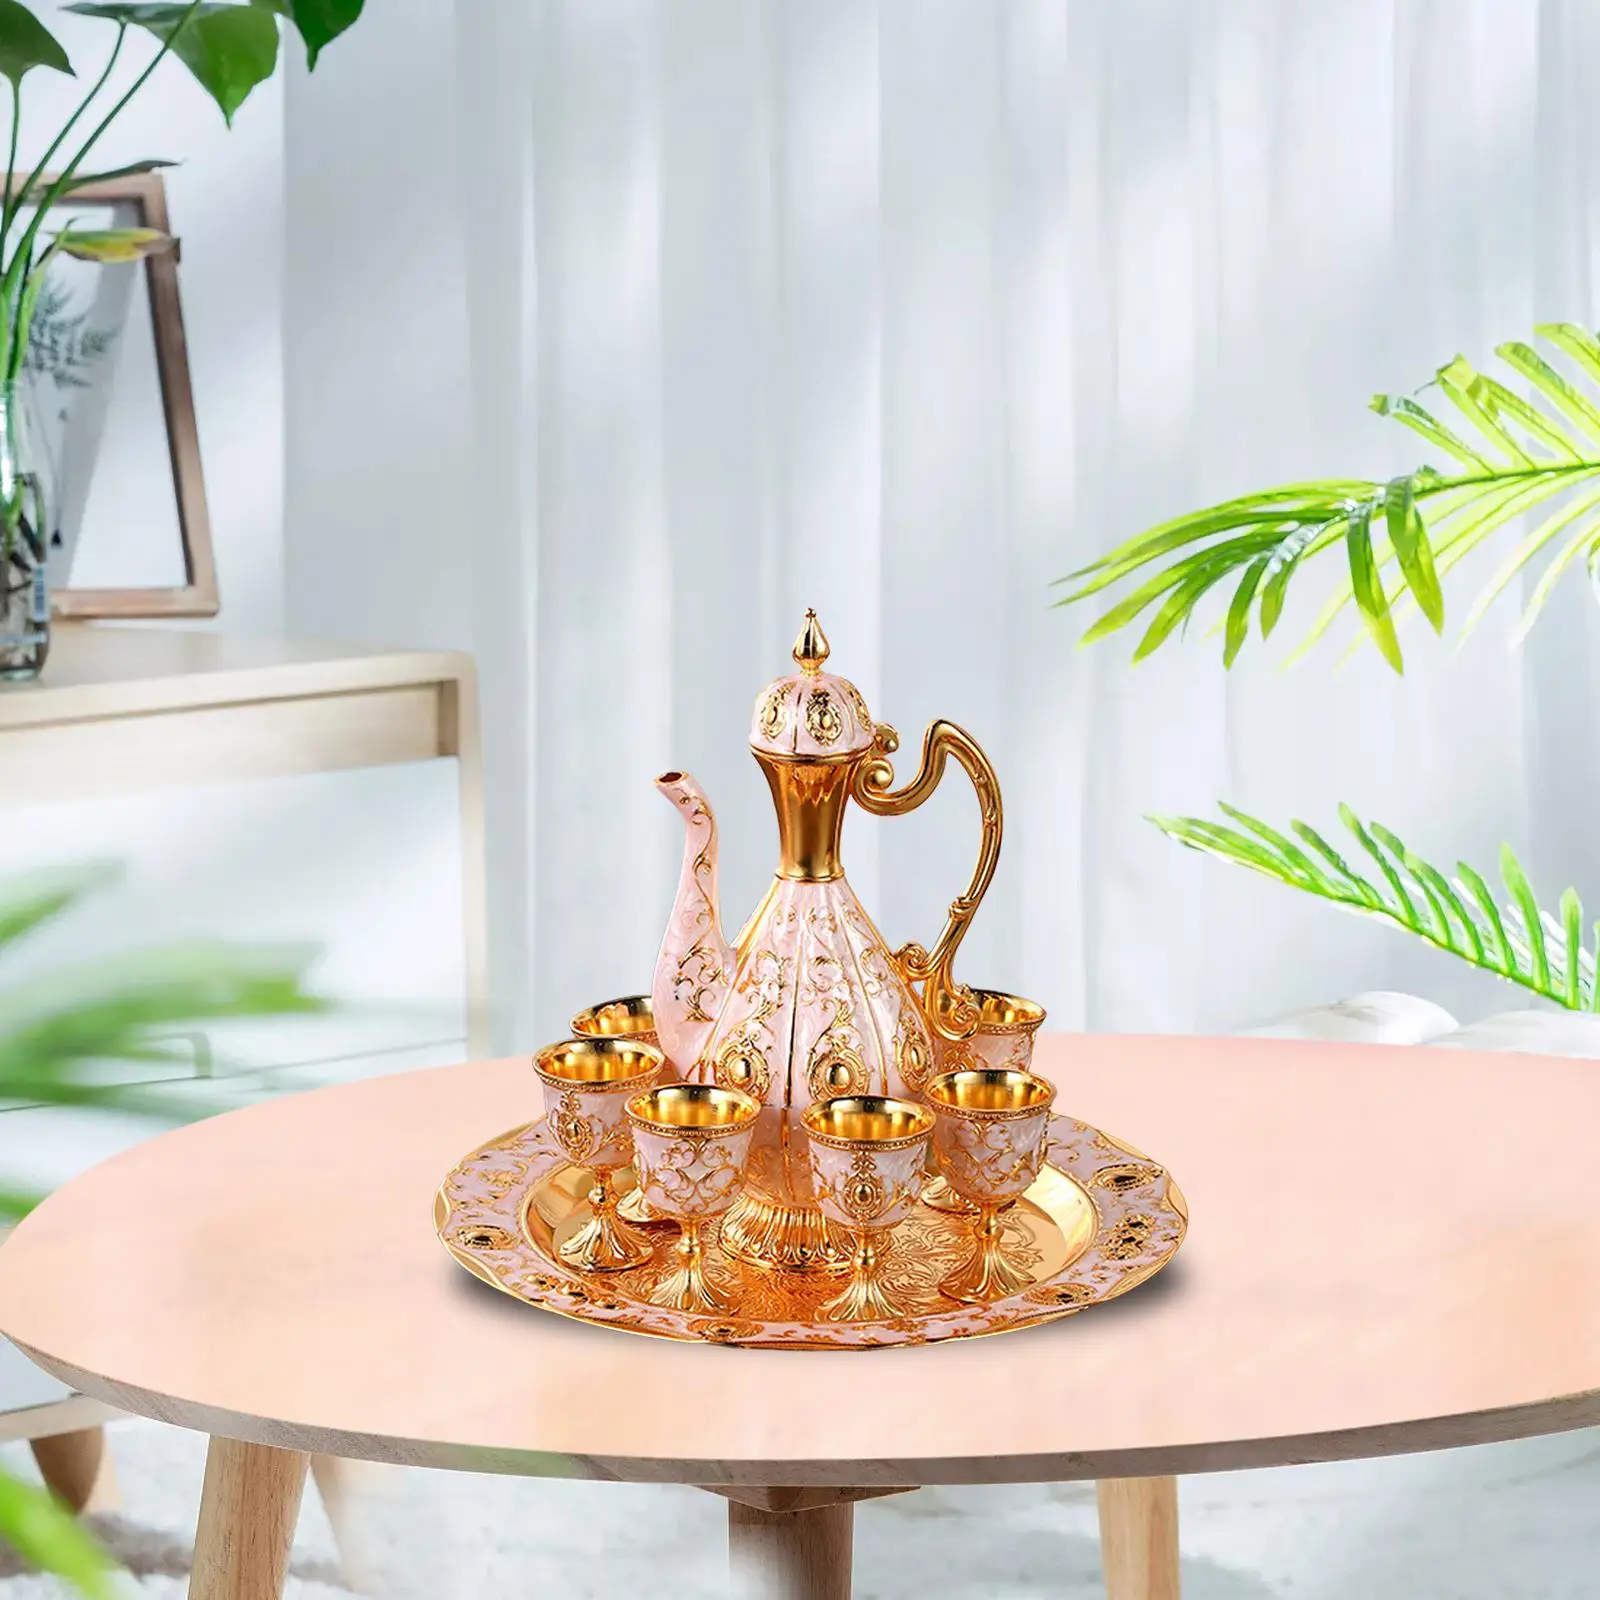 Luxury Turkish Coffee Pot Set Teapot Set with Tea Cup Drinkware Storage Tray for Table Dining Room Home Cabinet Decoration